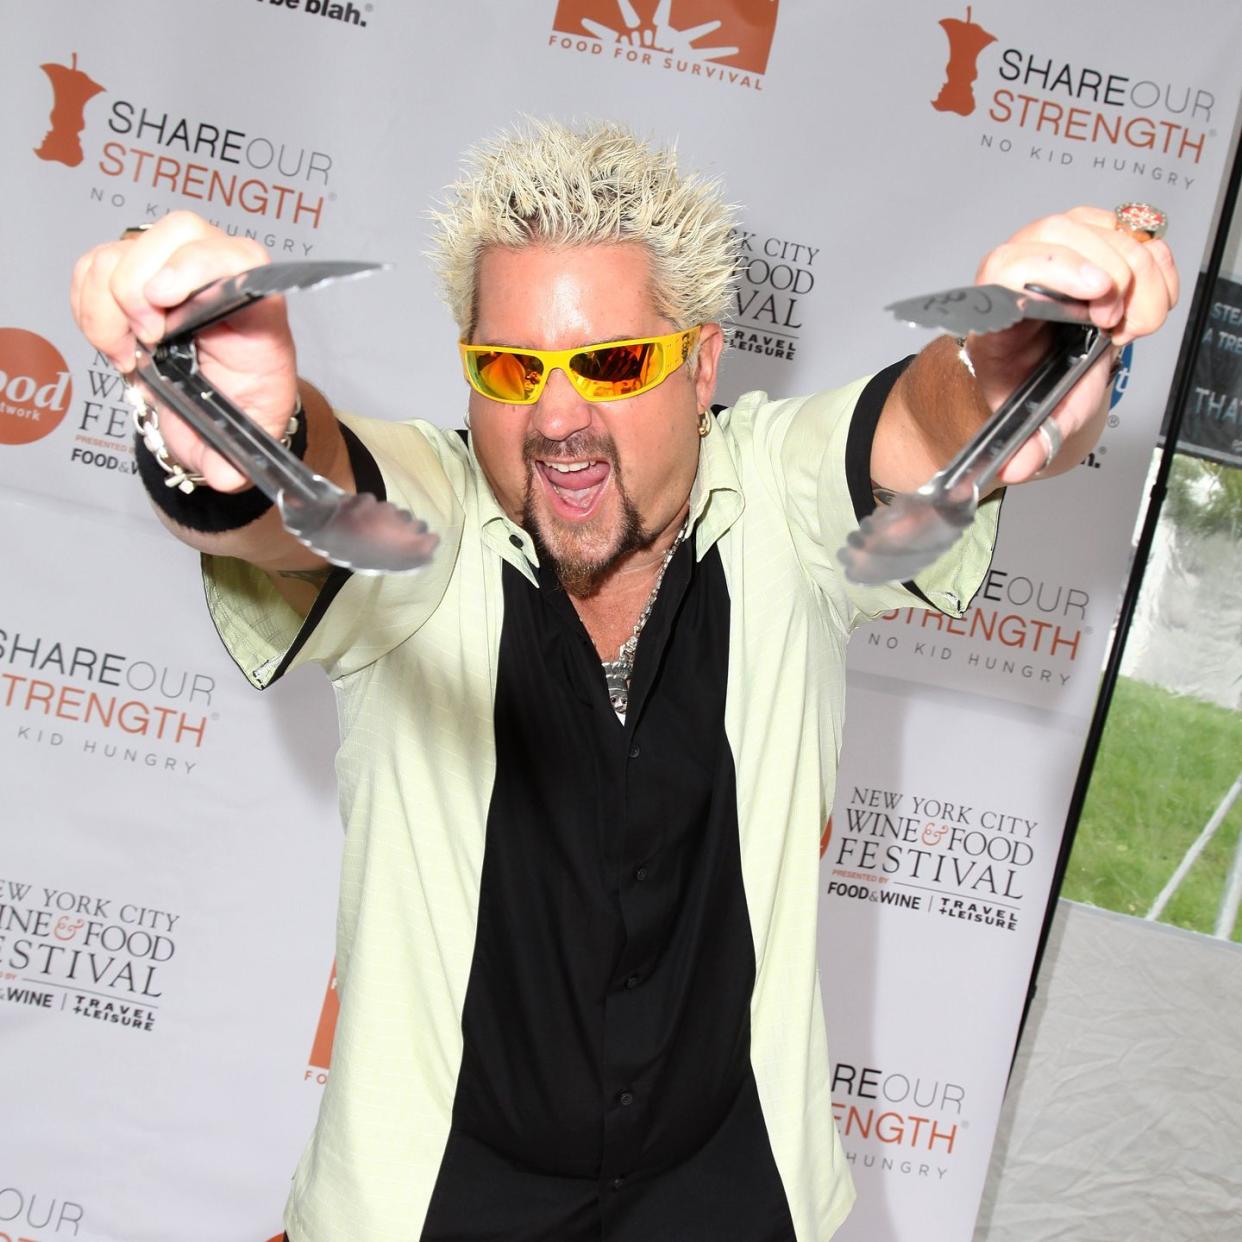 2009 food network nyc wine food festival guy fieri's live grill off